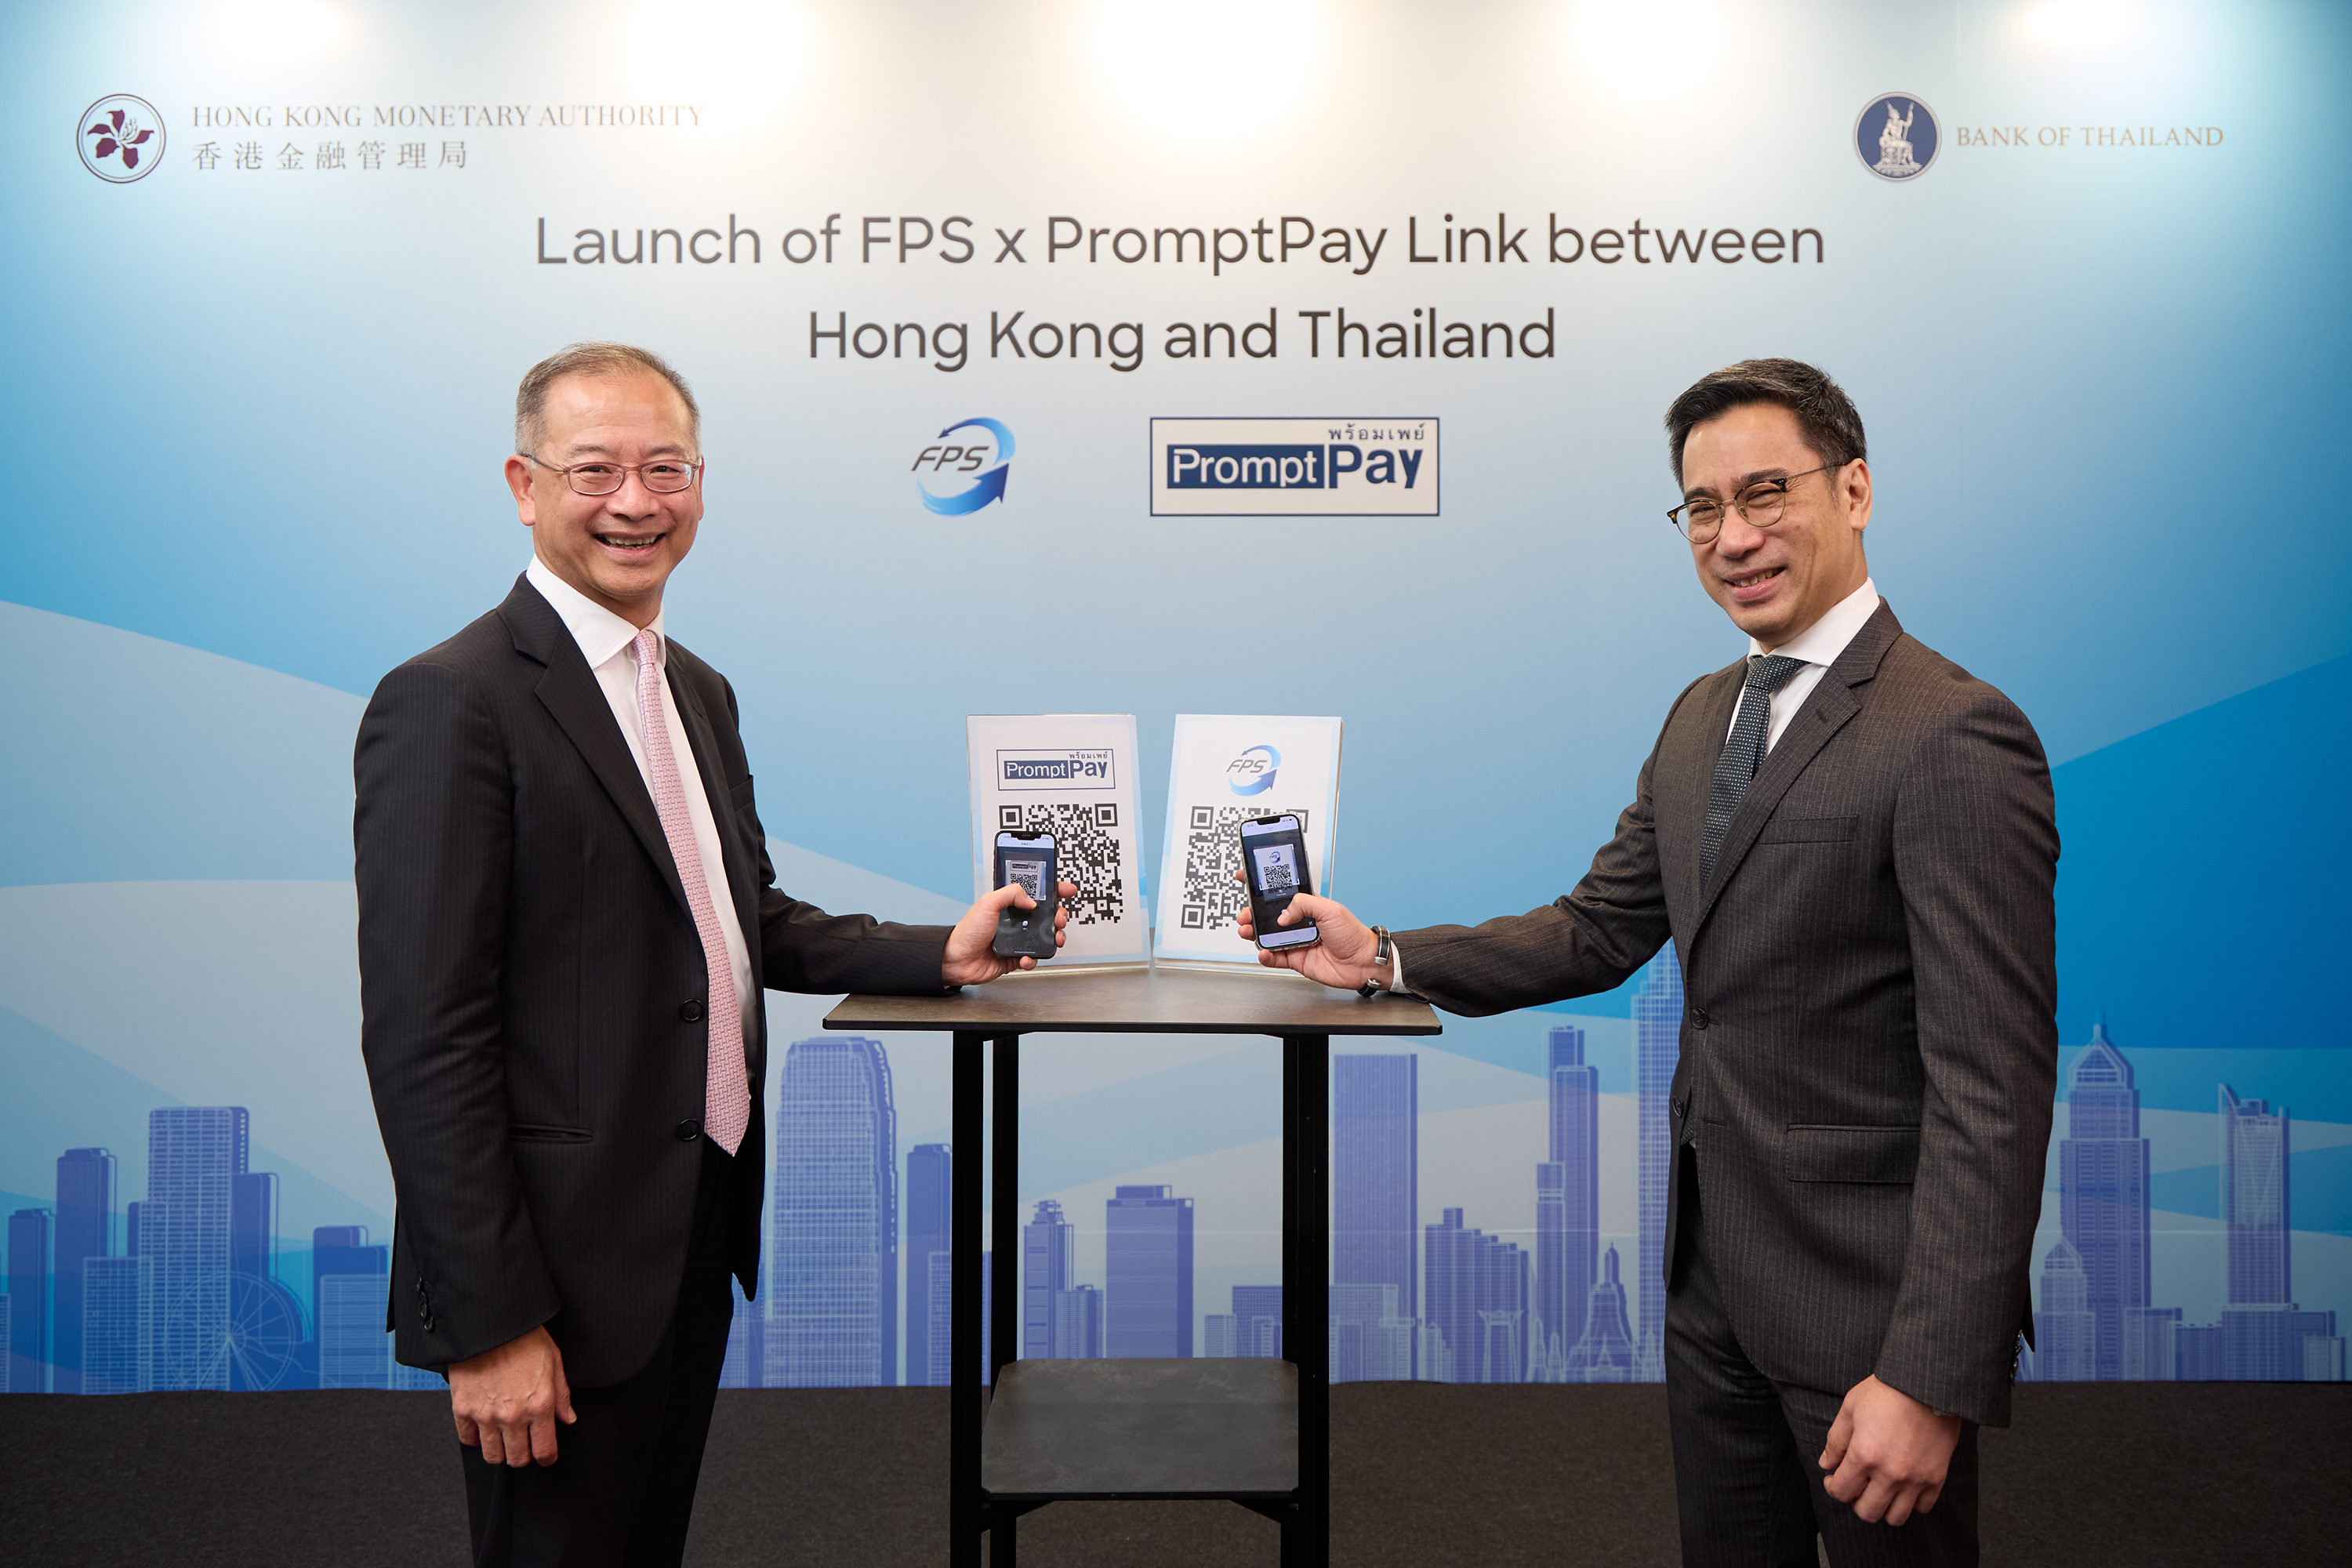 Mr Eddie Yue, Chief Executive of the Hong Kong Monetary Authority (left), and Dr Sethaput Suthiwartnarueput, Governor of the Bank of Thailand (right), attend the launching ceremony of the FPS x PromptPay Link.